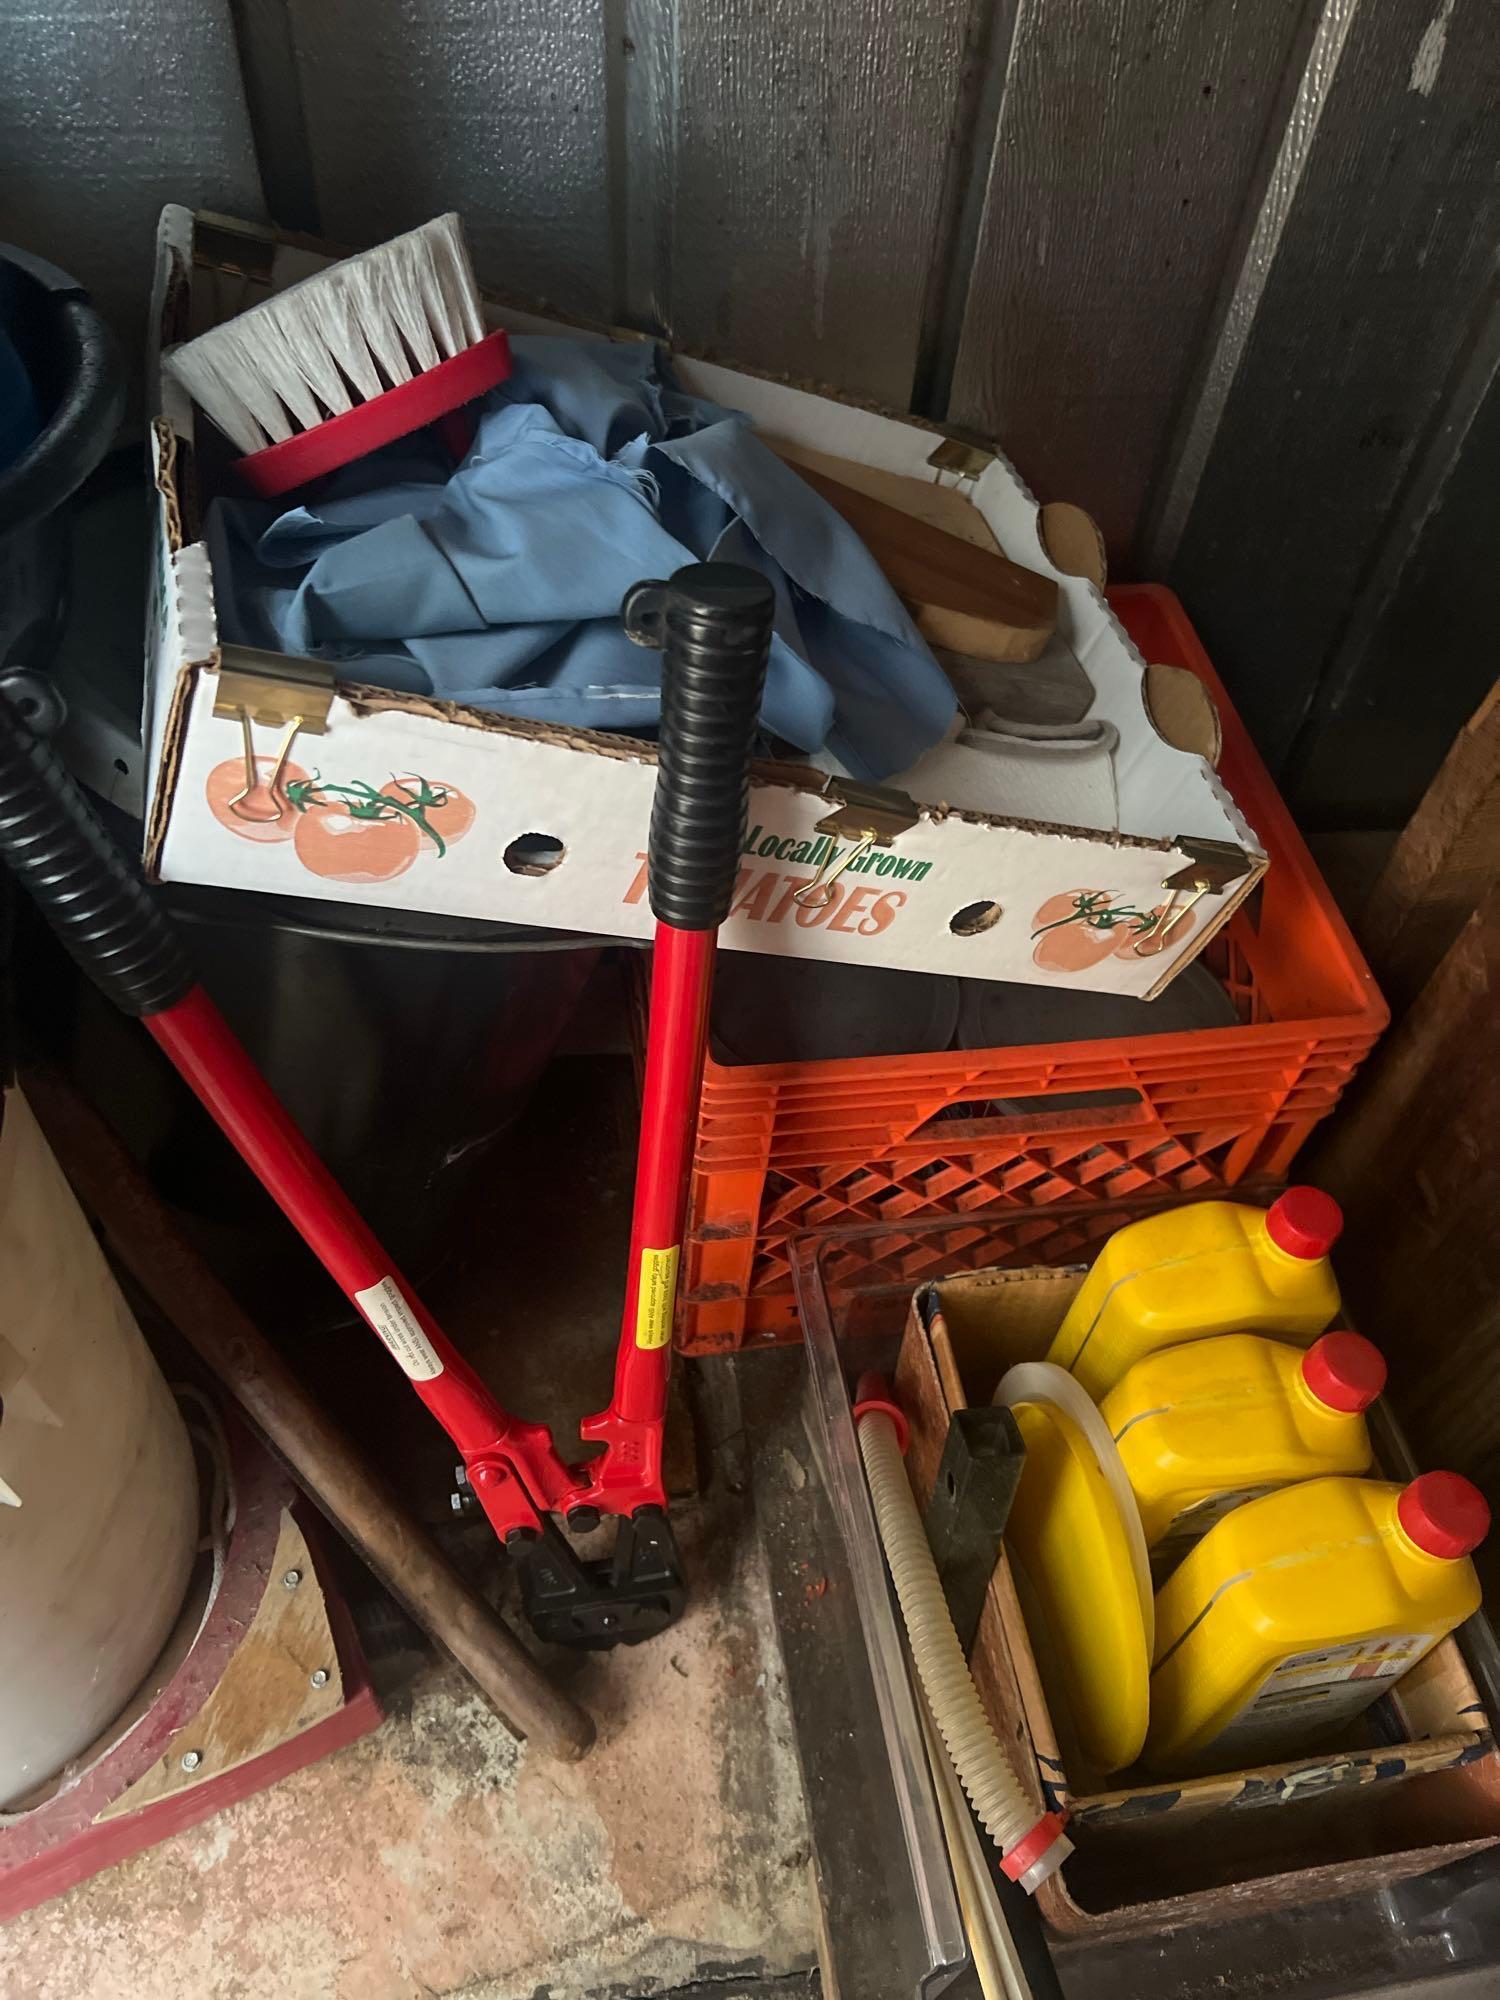 Contents of shelves in shed